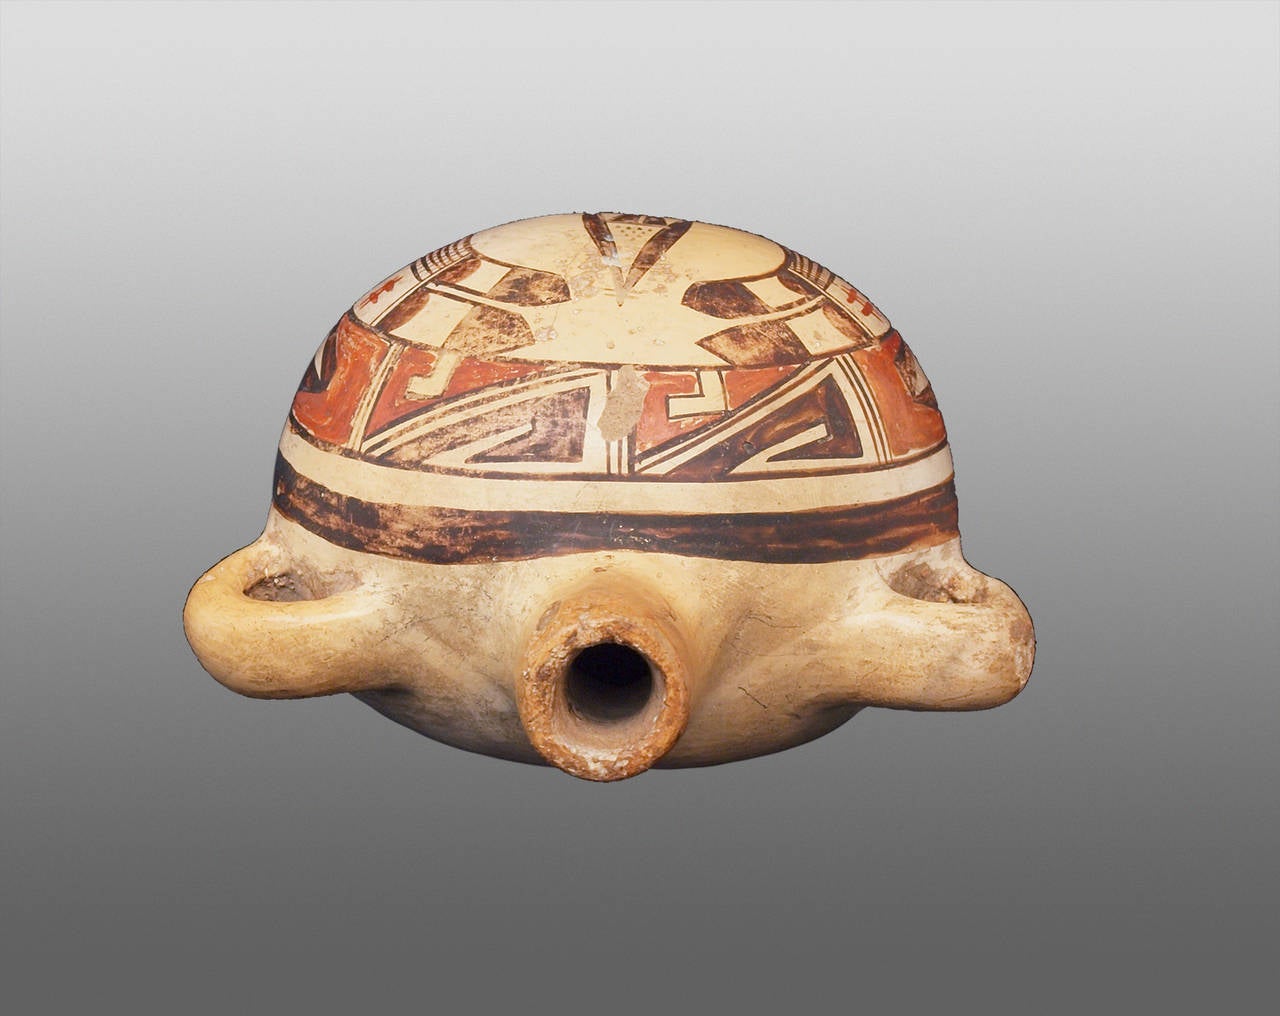 This exemplary earthenware canteen is finely painted in polychrome in a complex Prehistoric Revival pattern. The quality, characteristics and age of this piece are consistent with the work of the renowned Hopi potter, Nampeyo (1860-1942), to whom